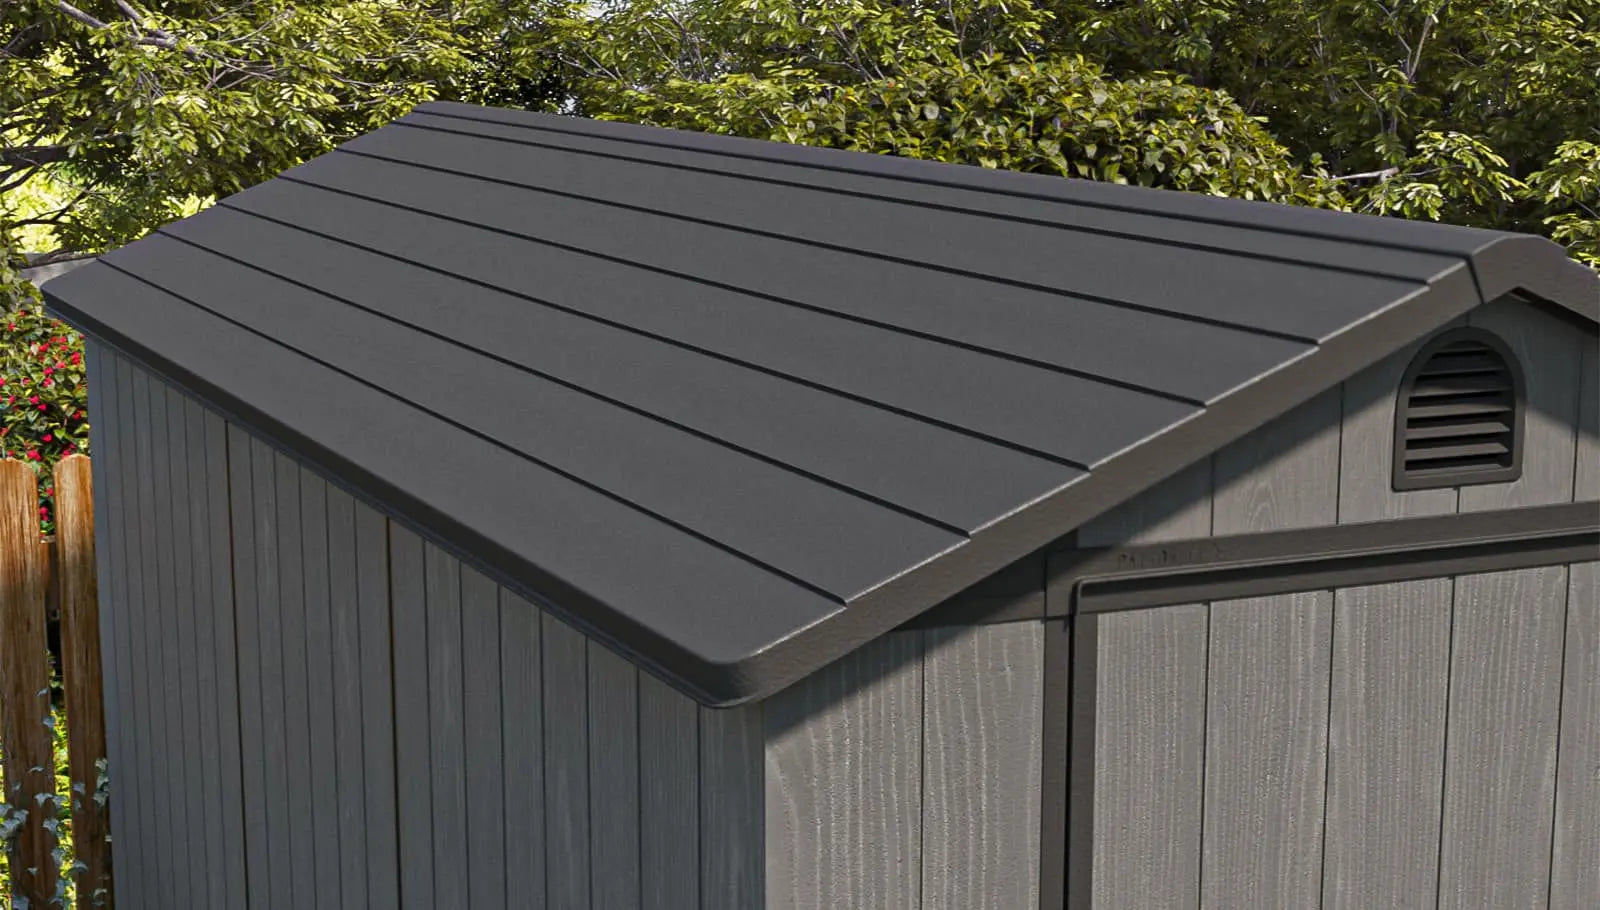 patiowell fit-it plastic storage shed Sloped Roof To Prevent Standing Water